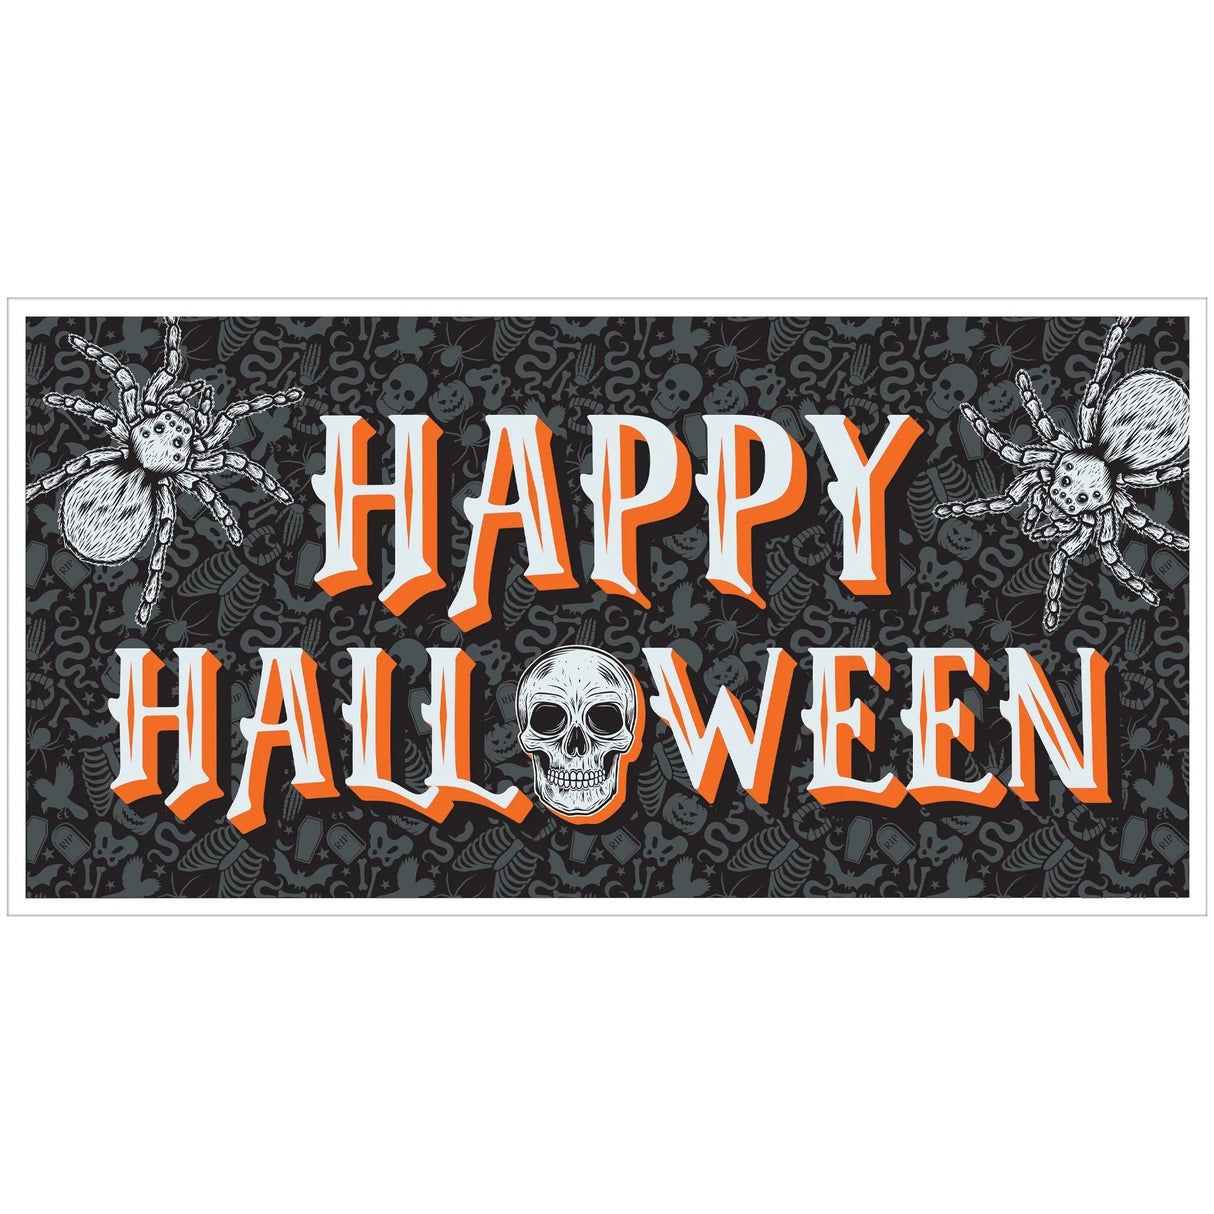 AMSCAN CA Halloween Wicked Haunting Halloween Banner, 33.5 x 65 Inches, 1 Count